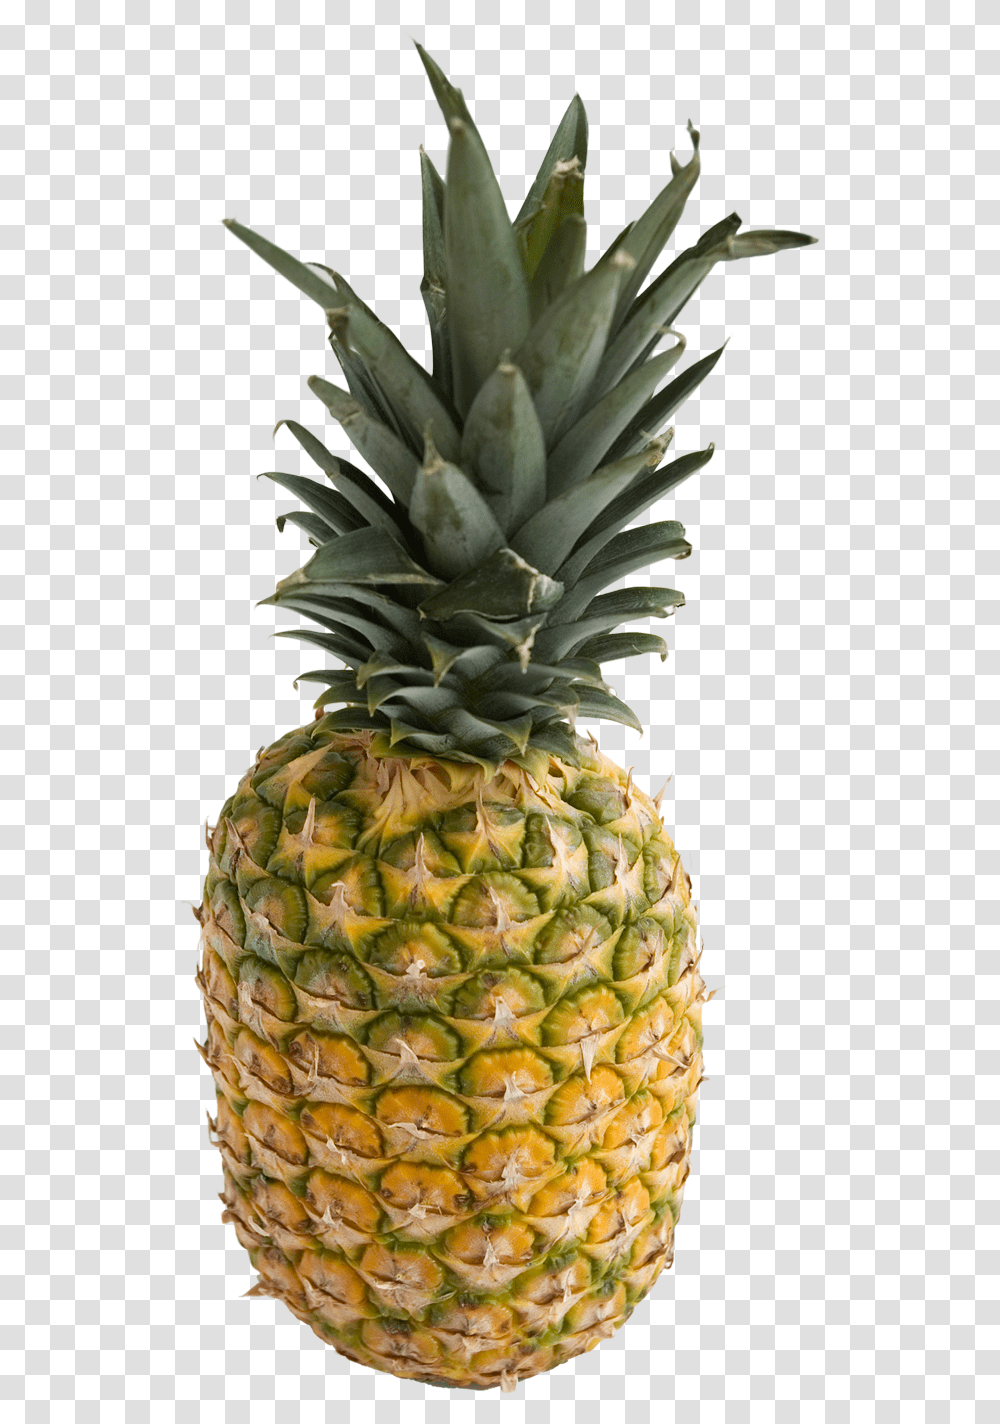 Pineapple And Vectors For Free Pineapple Ananas, Fruit, Plant, Food Transparent Png